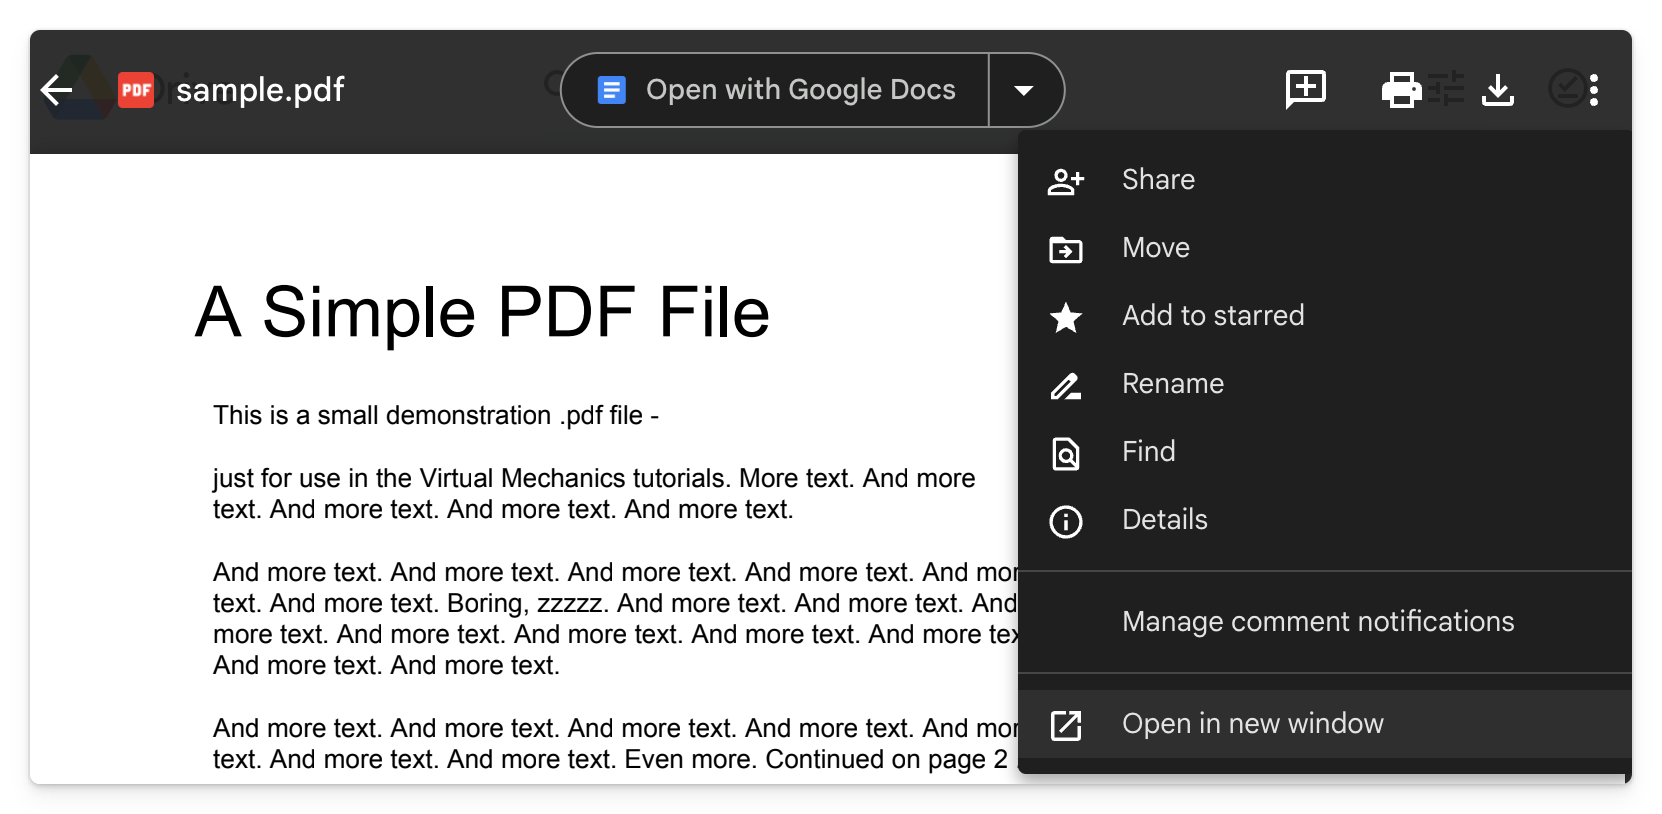 Open and retrieve the URL for your PDF in Google Drive